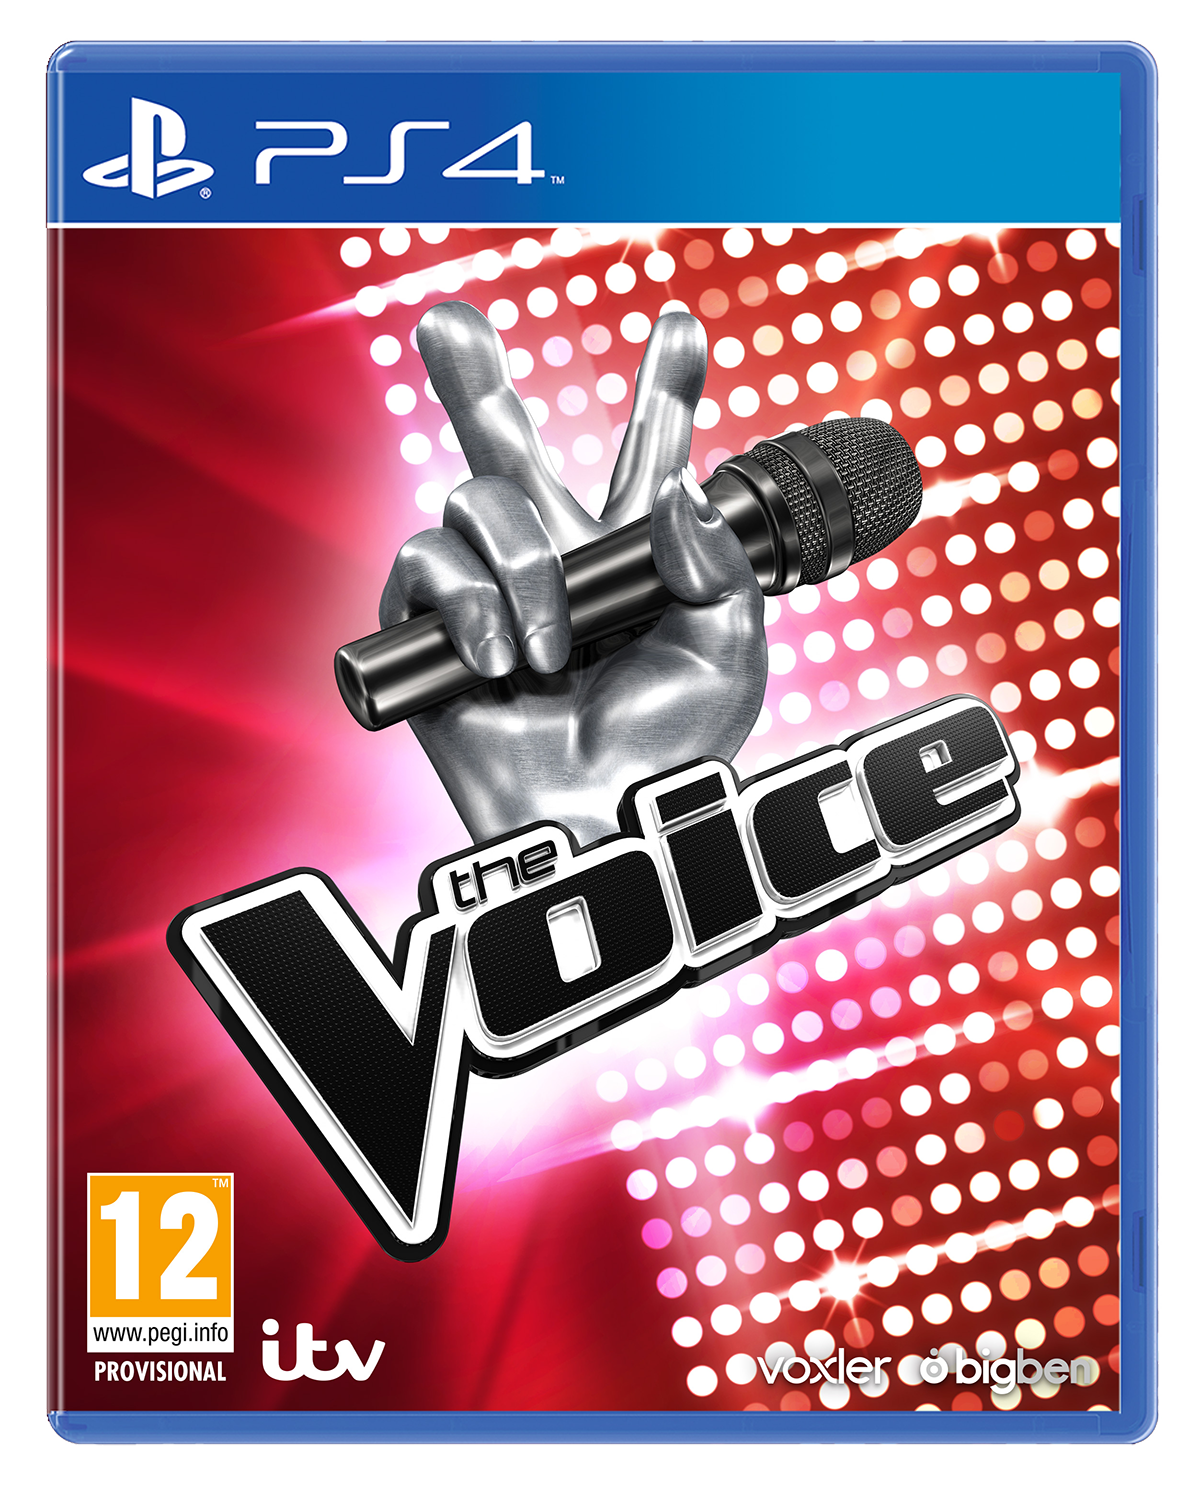 PS4_TheVoice_UK